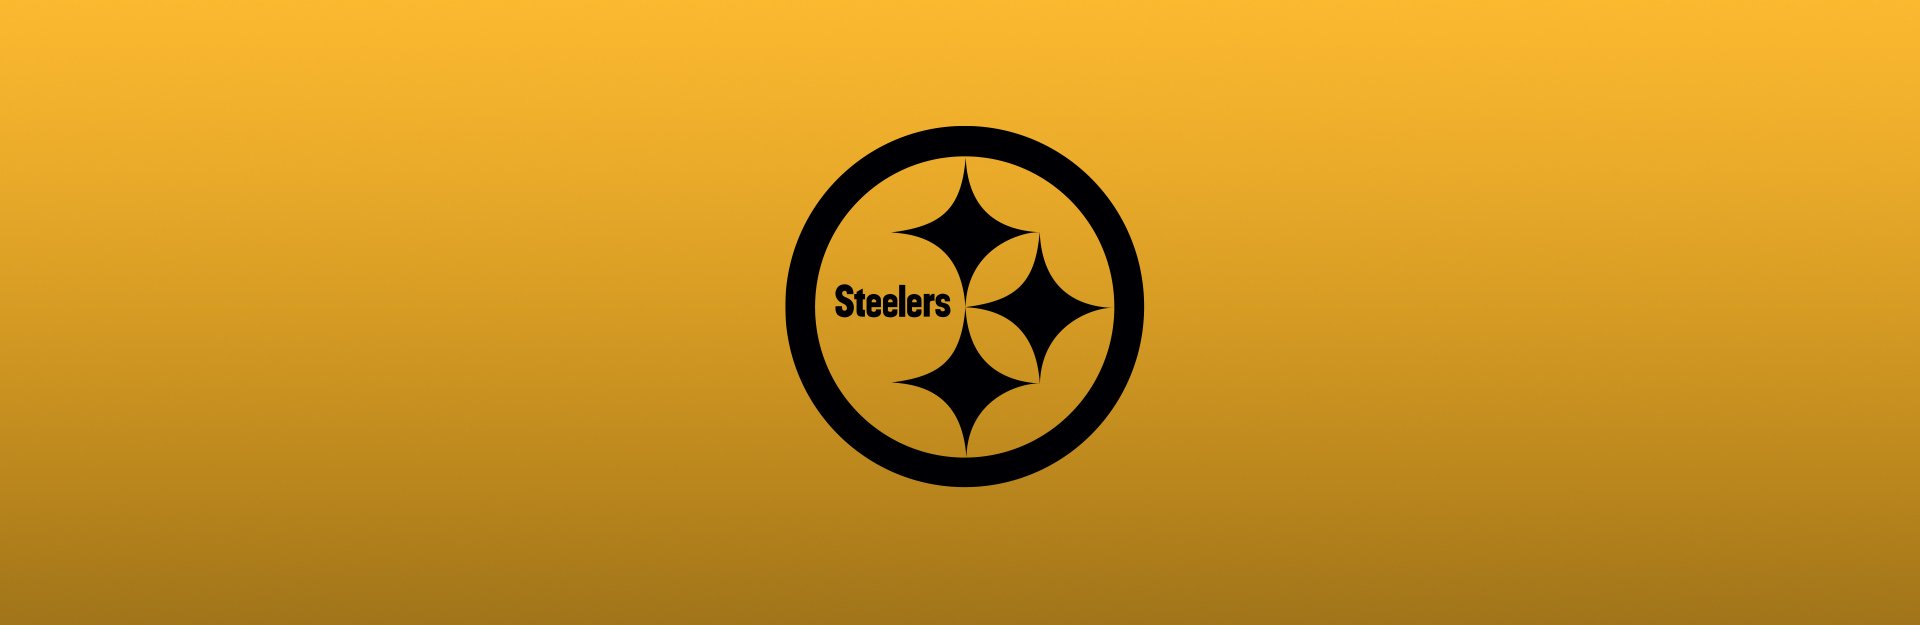 Pittsburgh Steelers logo overlaid on yellow-gold background